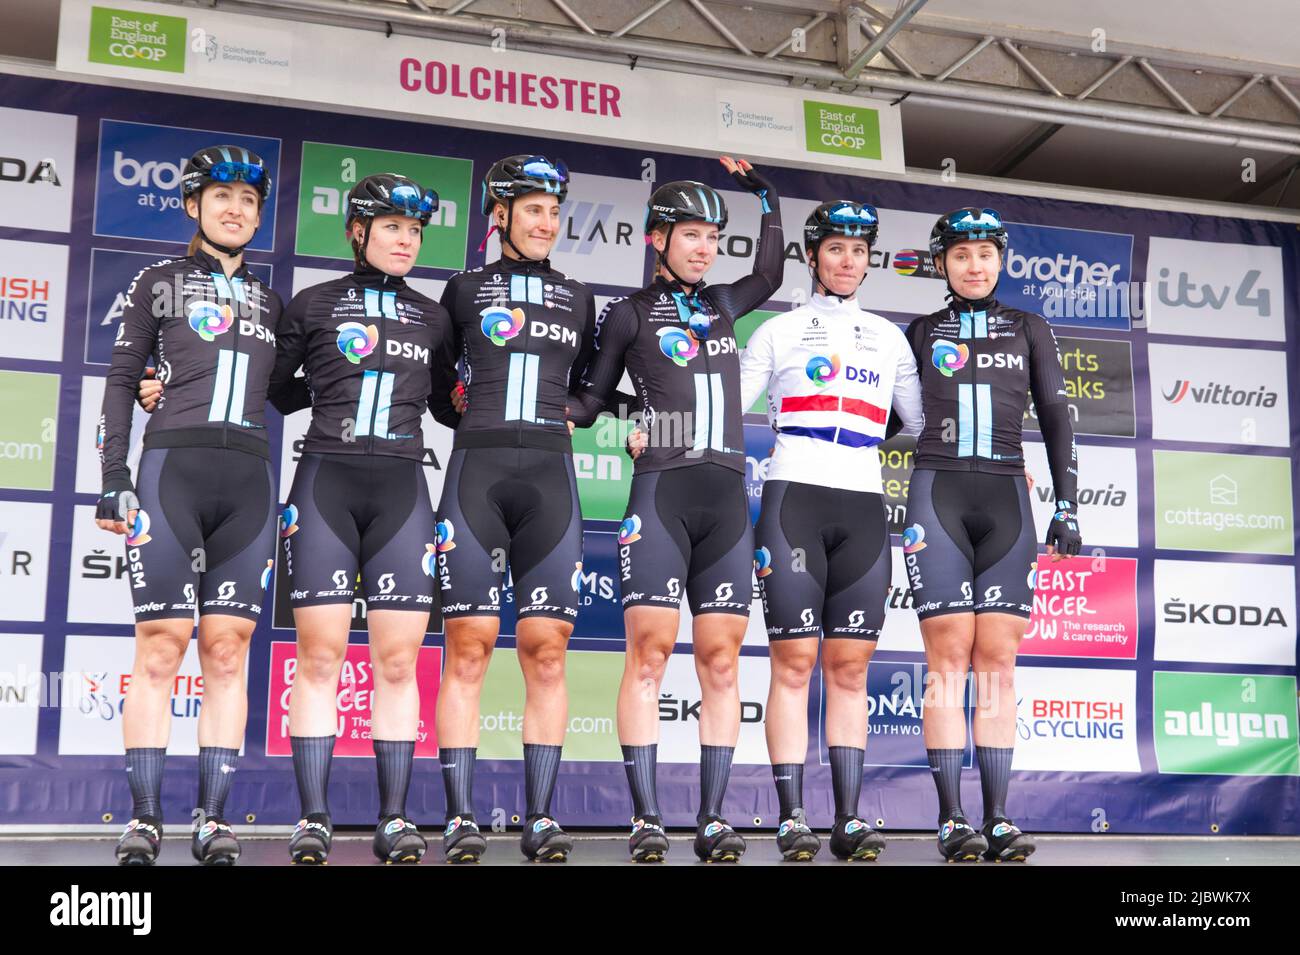 Women's cycling Team DSM being introduced to the crowd before stage one of the Women's Tour of Britain 2022 at Colchester in Essex. Stock Photo